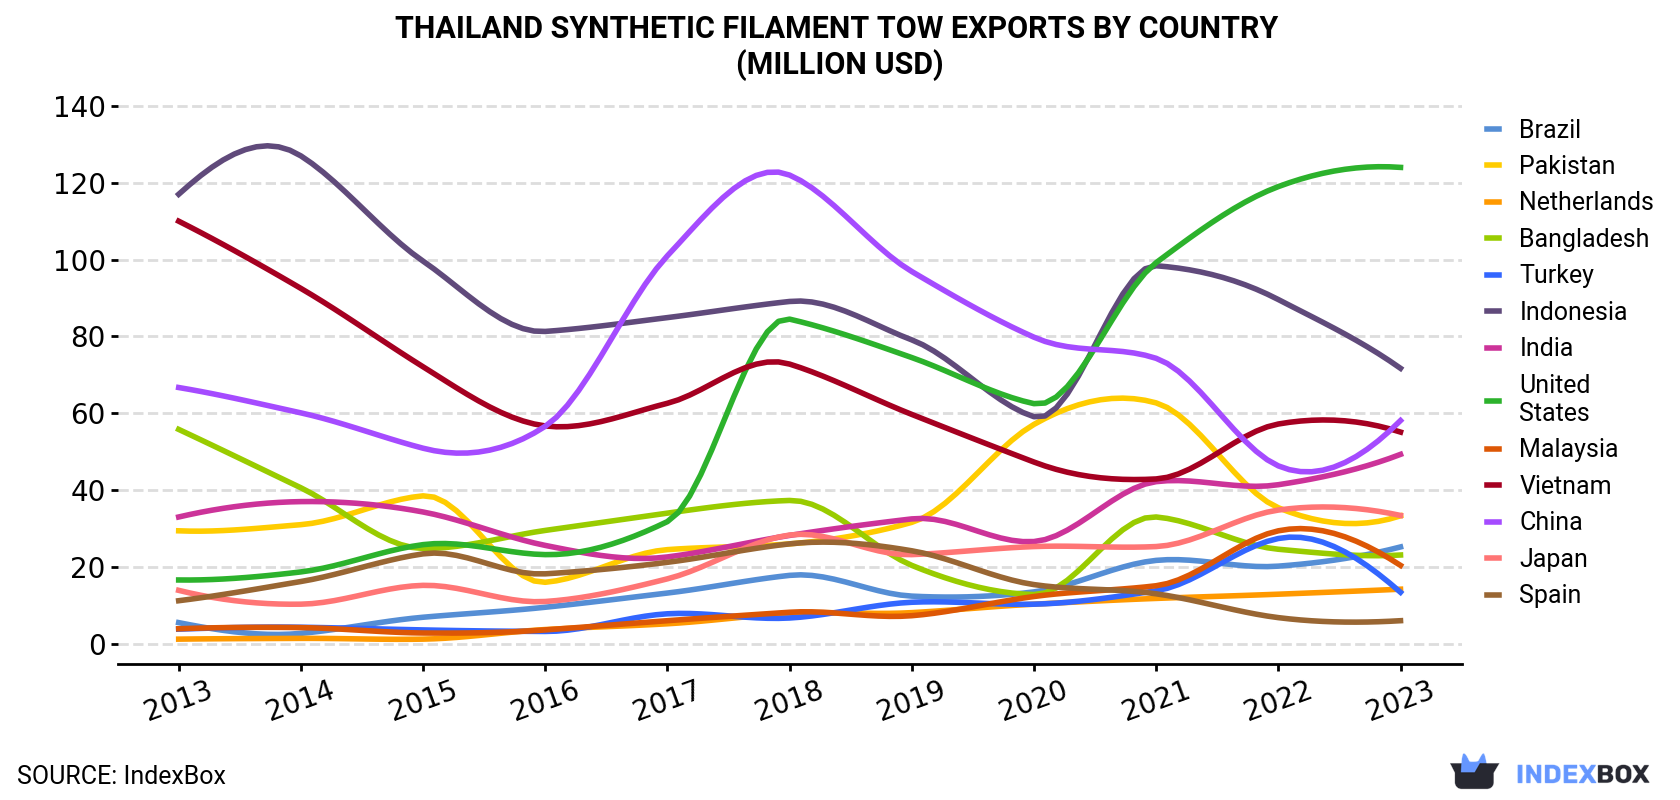 Thailand Synthetic Filament Tow Exports By Country (Million USD)